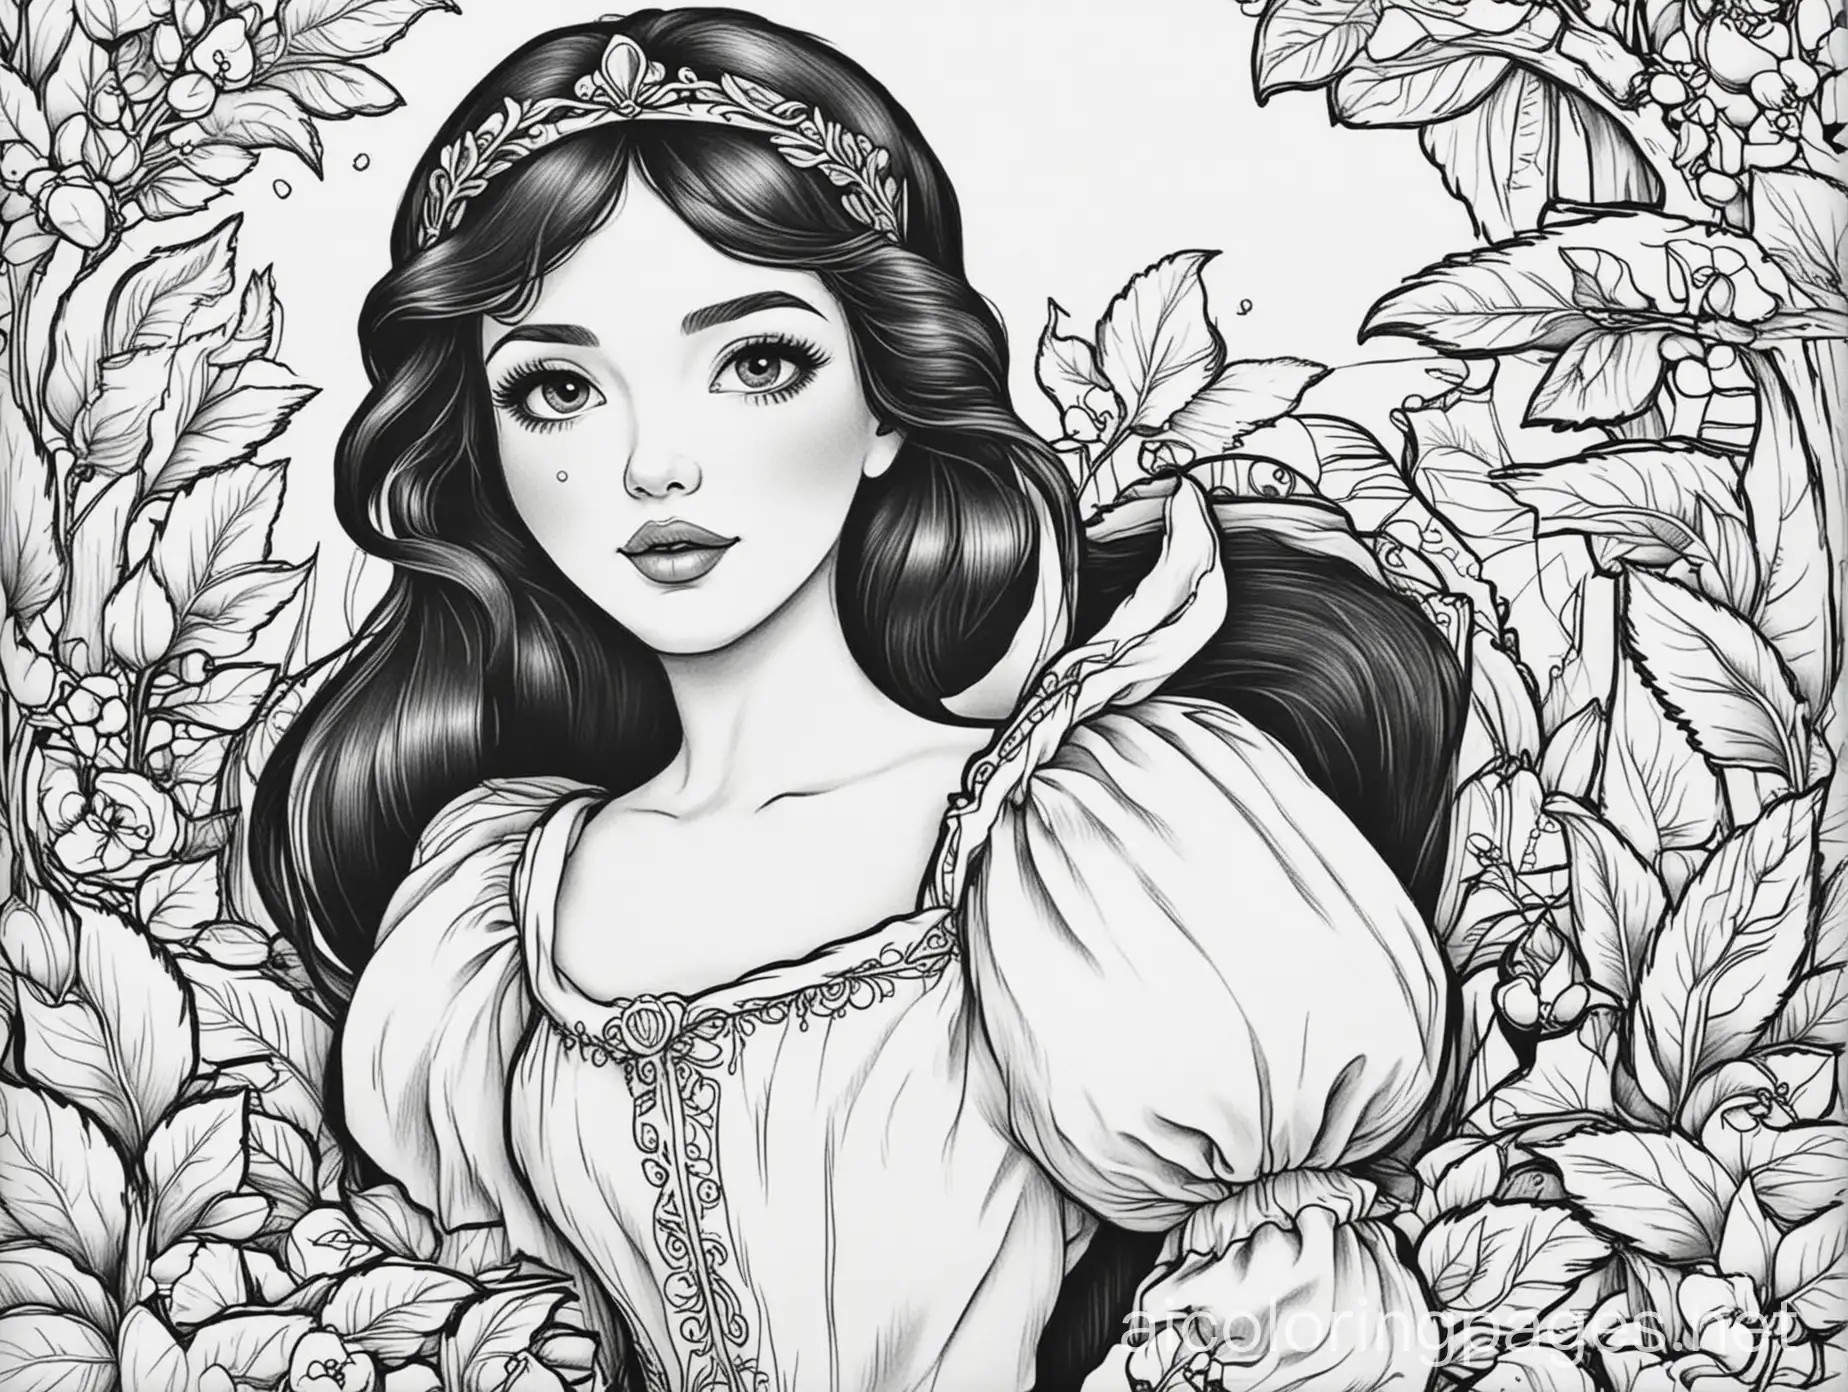 Snow white coloring 50 pages, Coloring Page, black and white, line art, white background, Simplicity, Ample White Space. The background of the coloring page is plain white to make it easy for young children to color within the lines. The outlines of all the subjects are easy to distinguish, making it simple for kids to color without too much difficulty